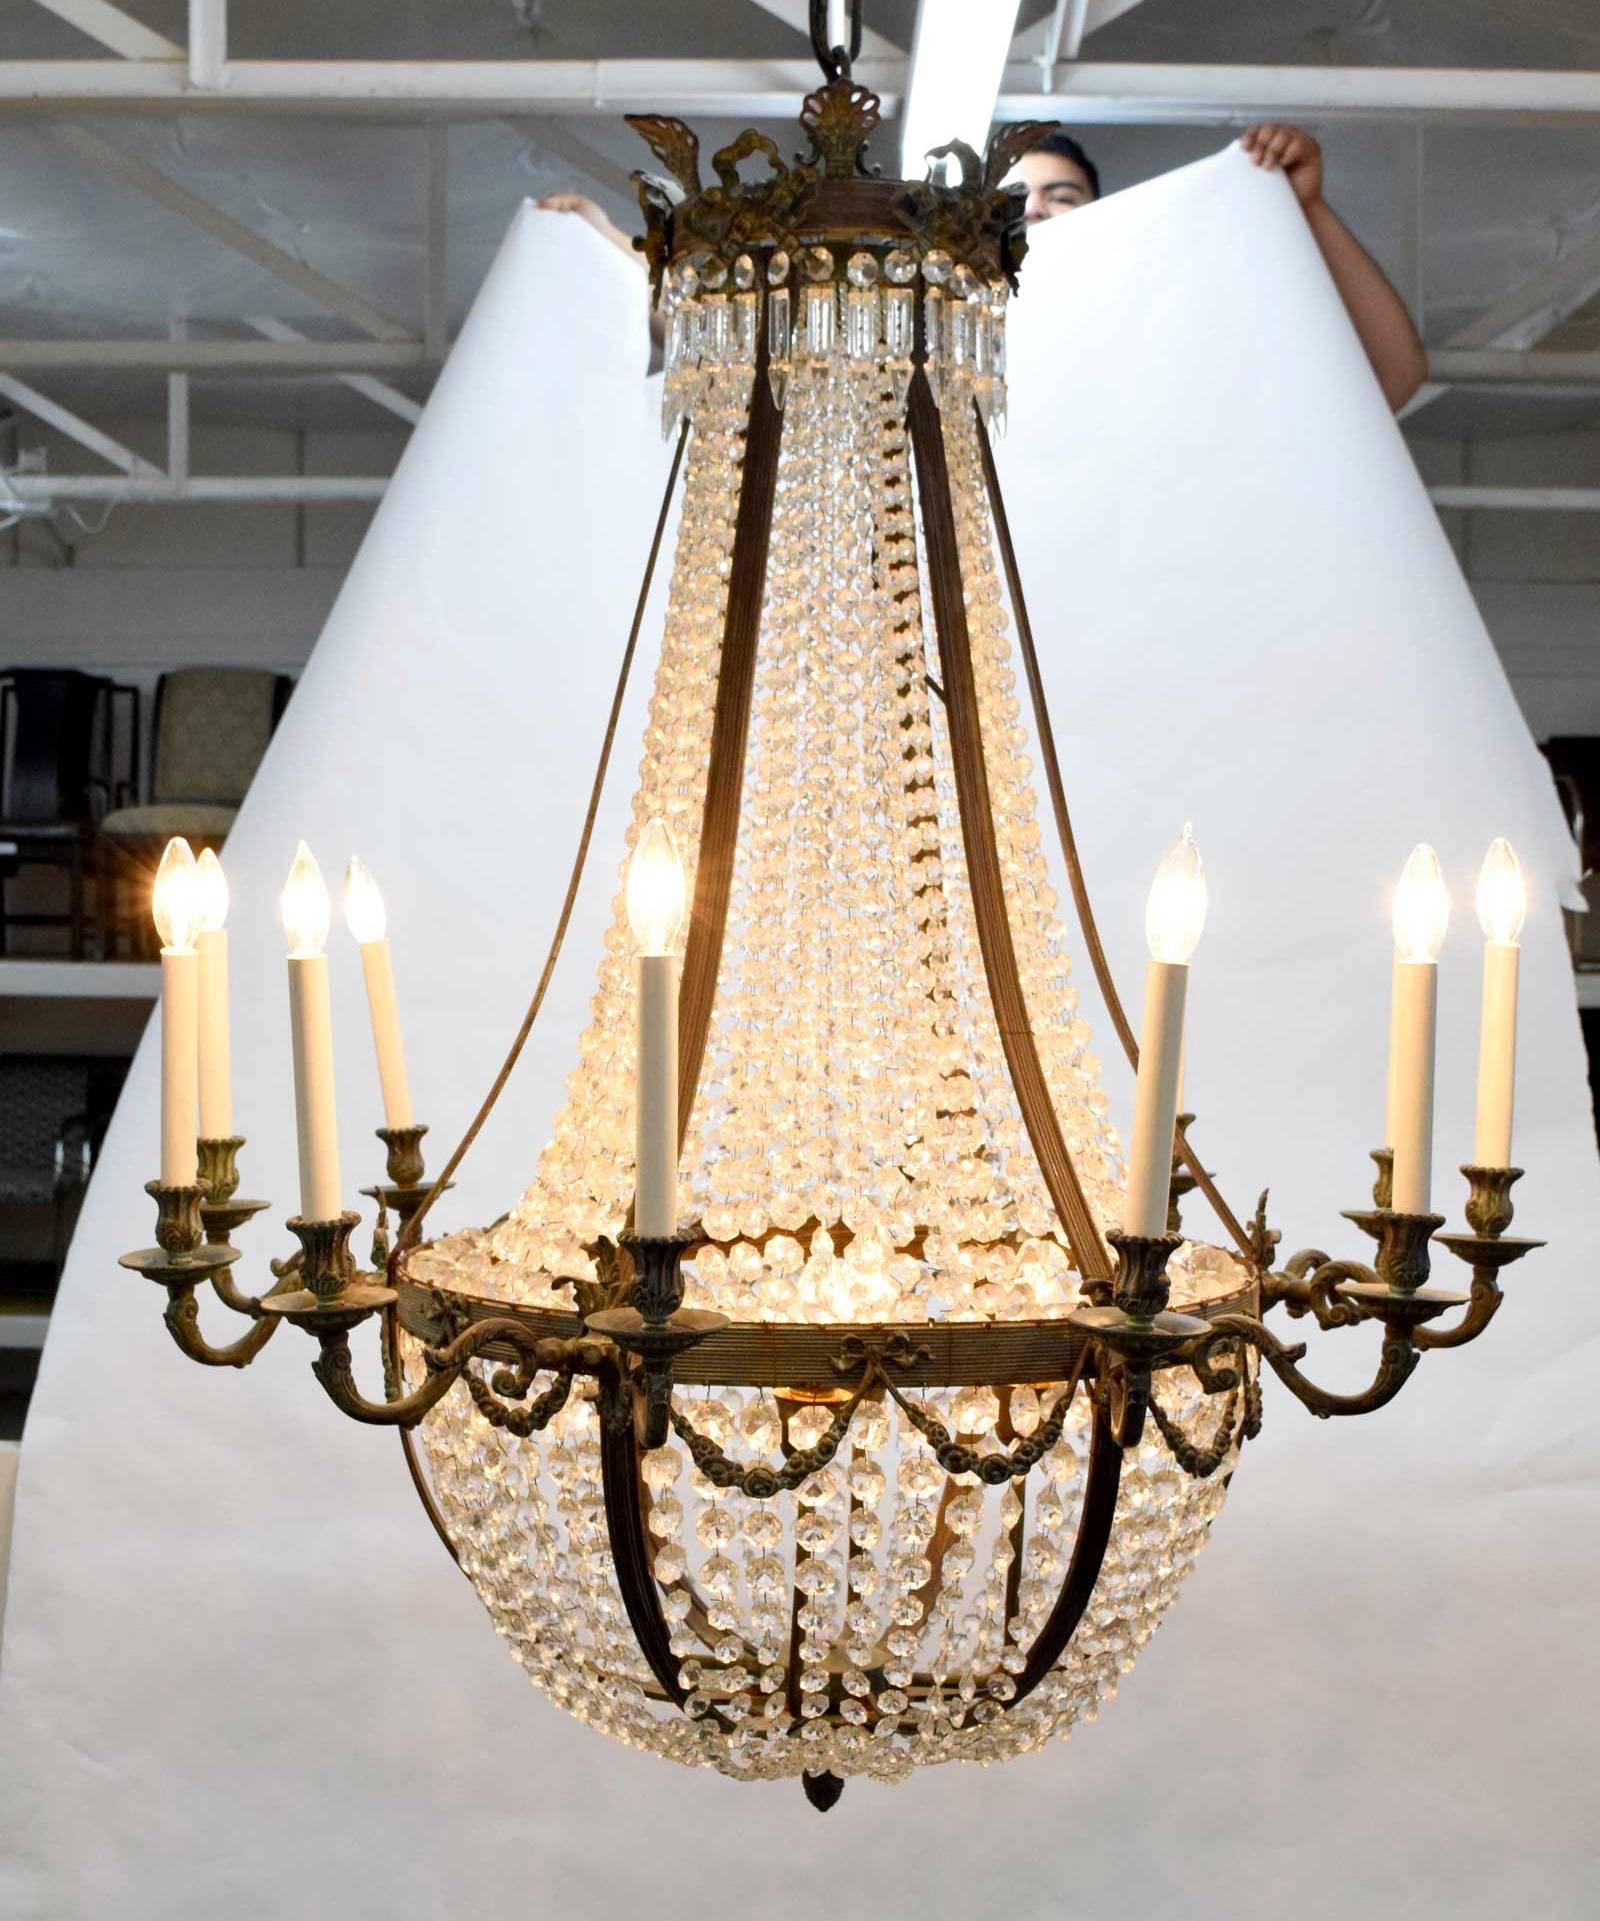 An exceptionally large tent, bag beaded and swagged chandelier in the Empire style. Chandelier has 12 ormolu arms radiating from a circular body suspending a graduated beaded bag which terminates in a hollow hub with ribbon detail. Four bulbs